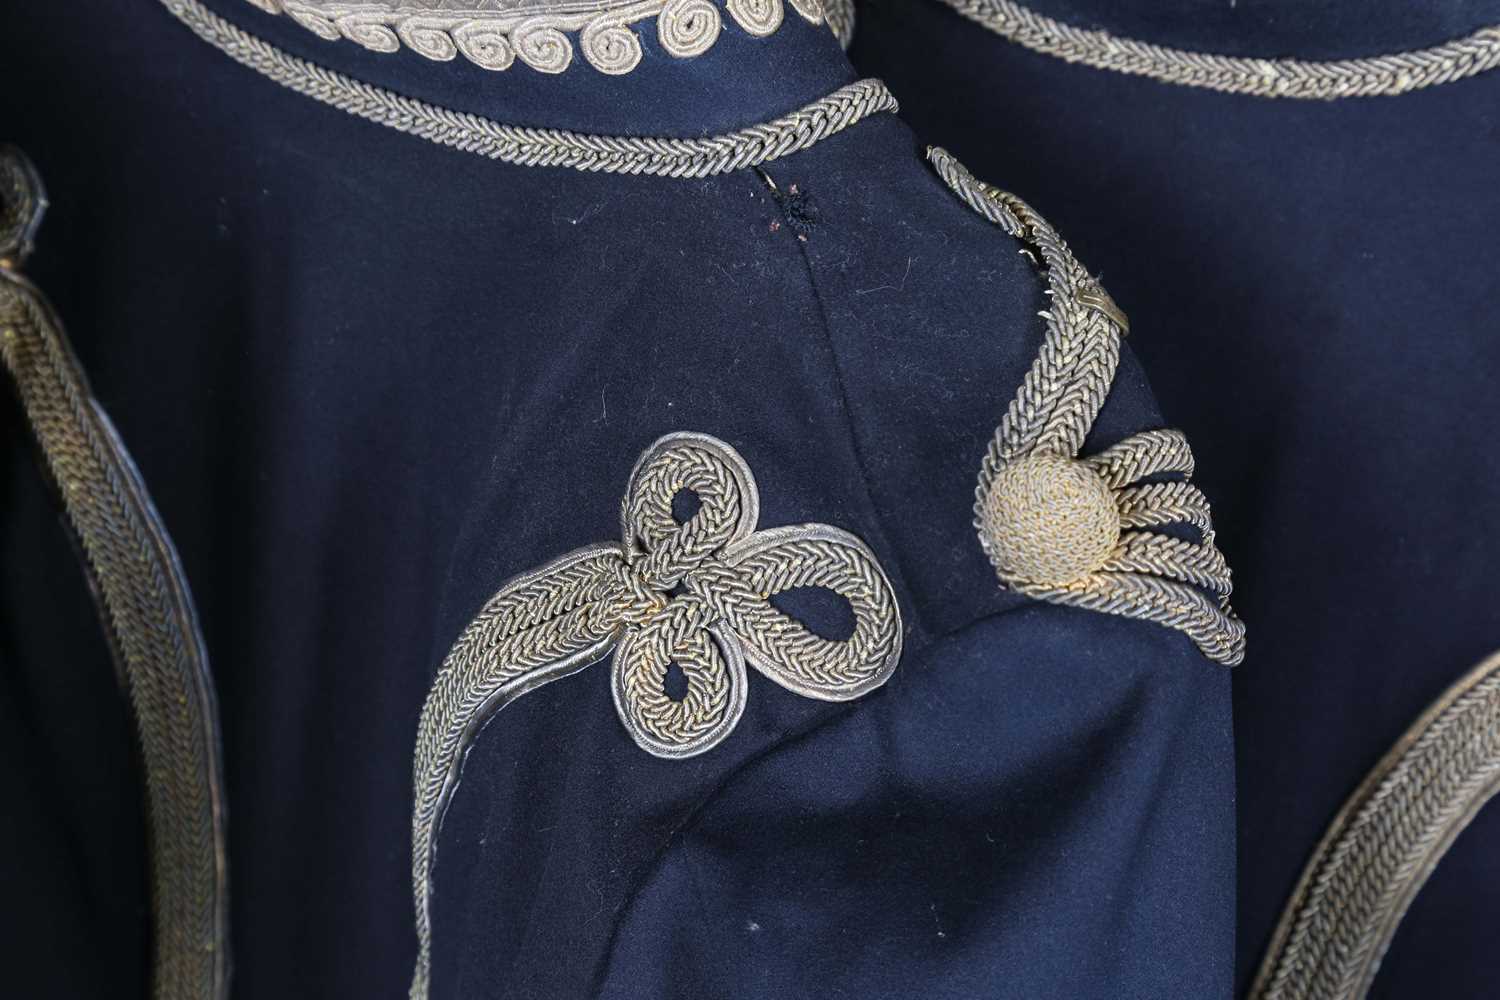 A group of early 20th century officer's dress tunics with bullion-embroidered decoration and rank - Image 22 of 23